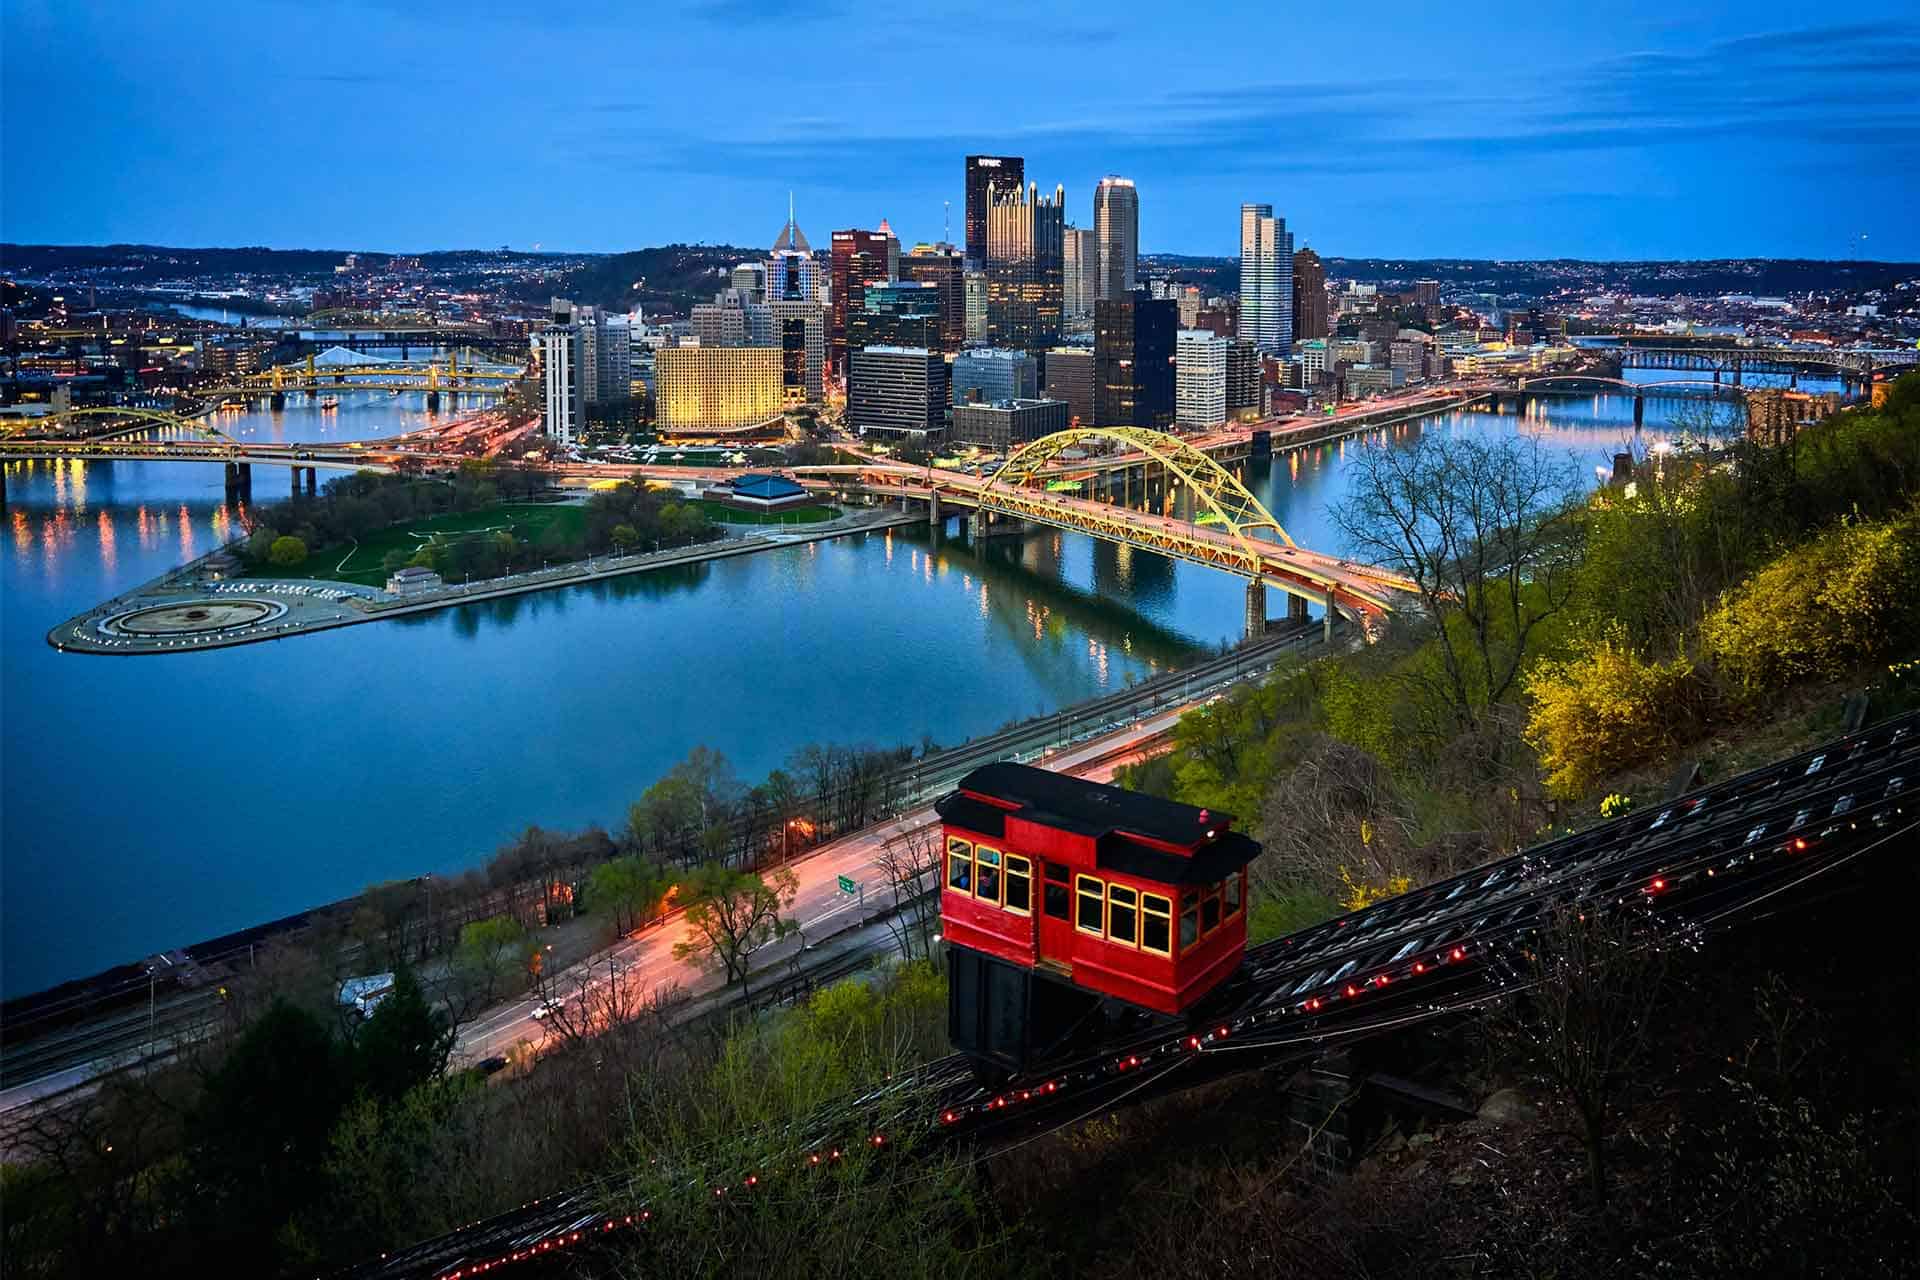 places to visit near university of pittsburgh